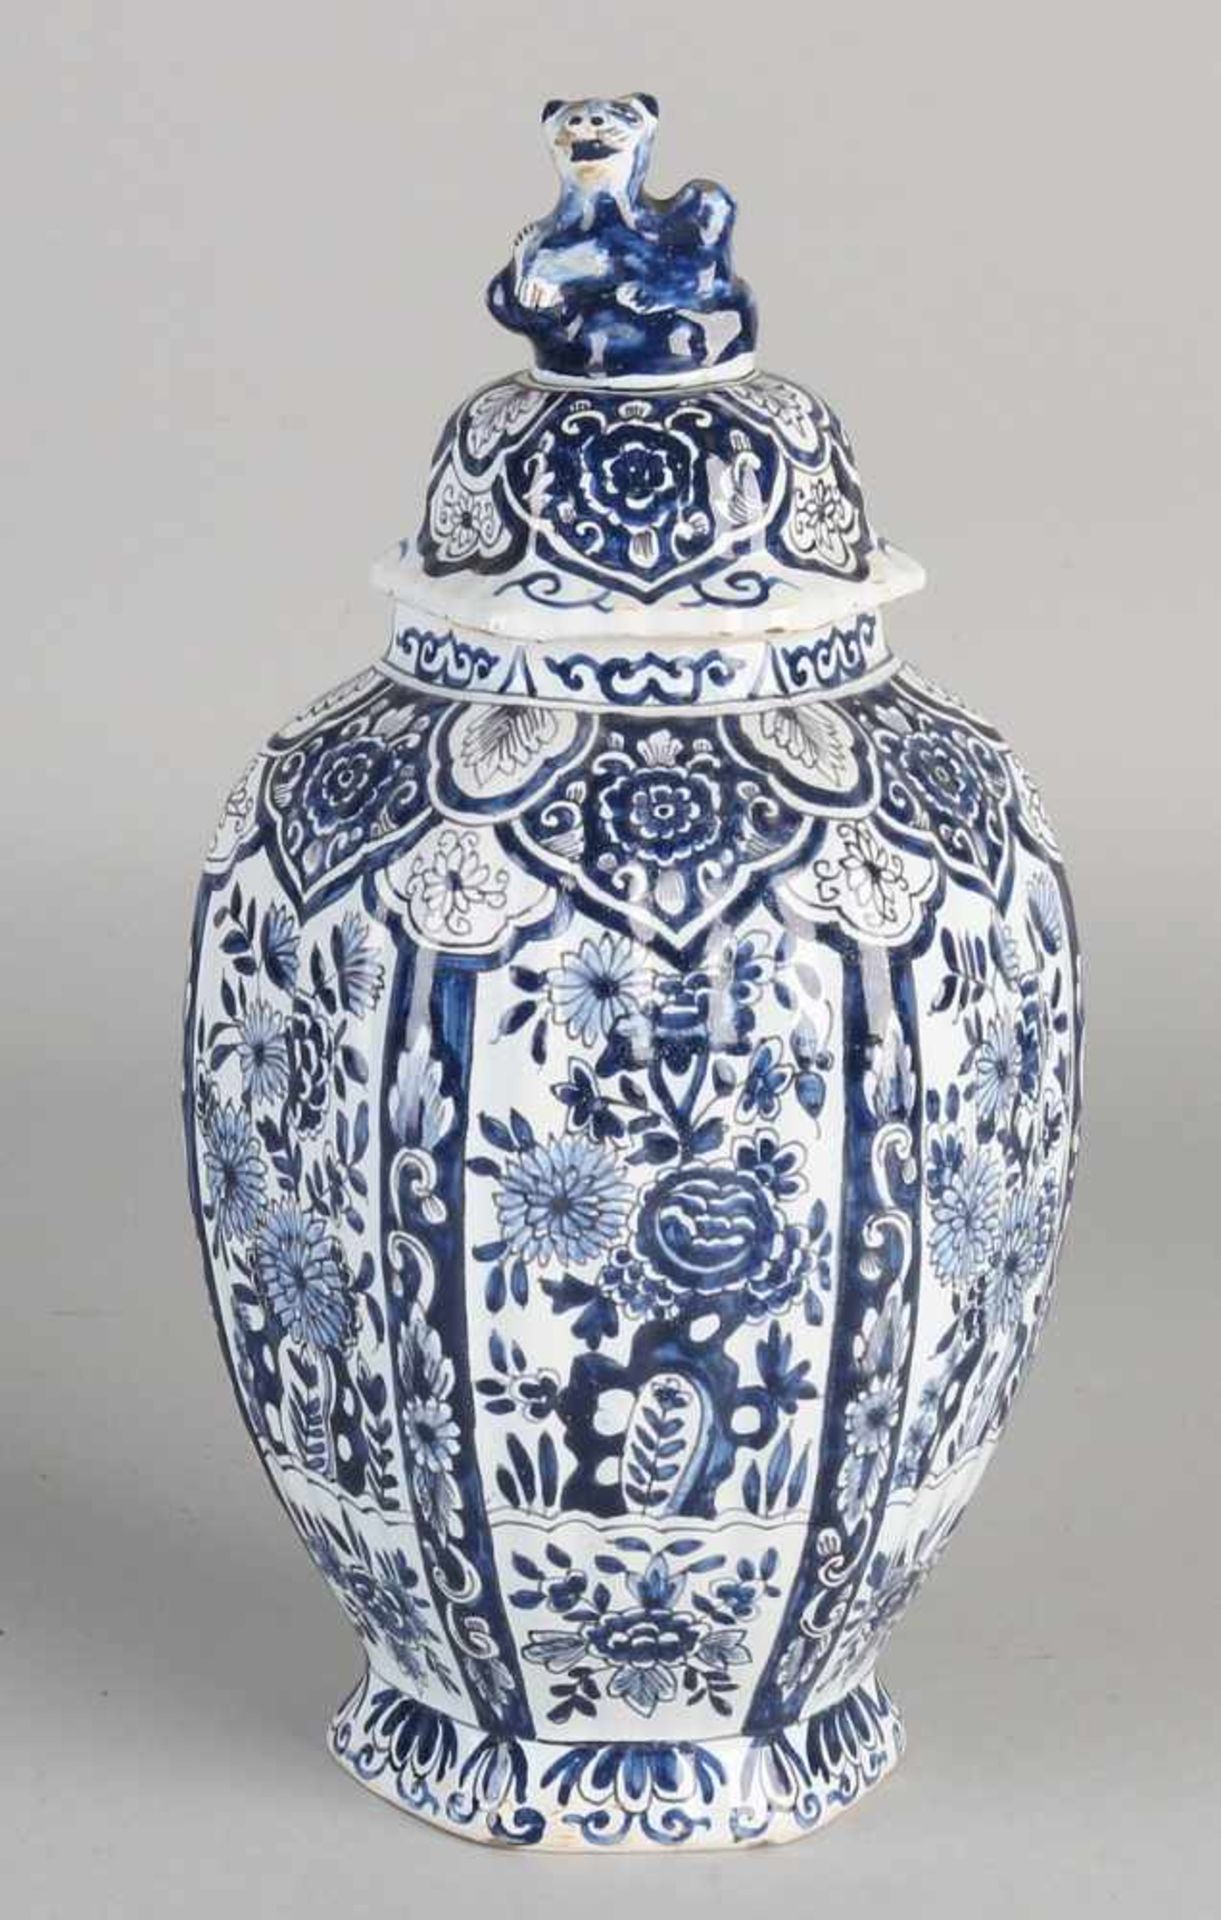 Antique Delft Fayence APK labeled vase with lion / floral decoration. Six-sided. Size: H 26 cm. In